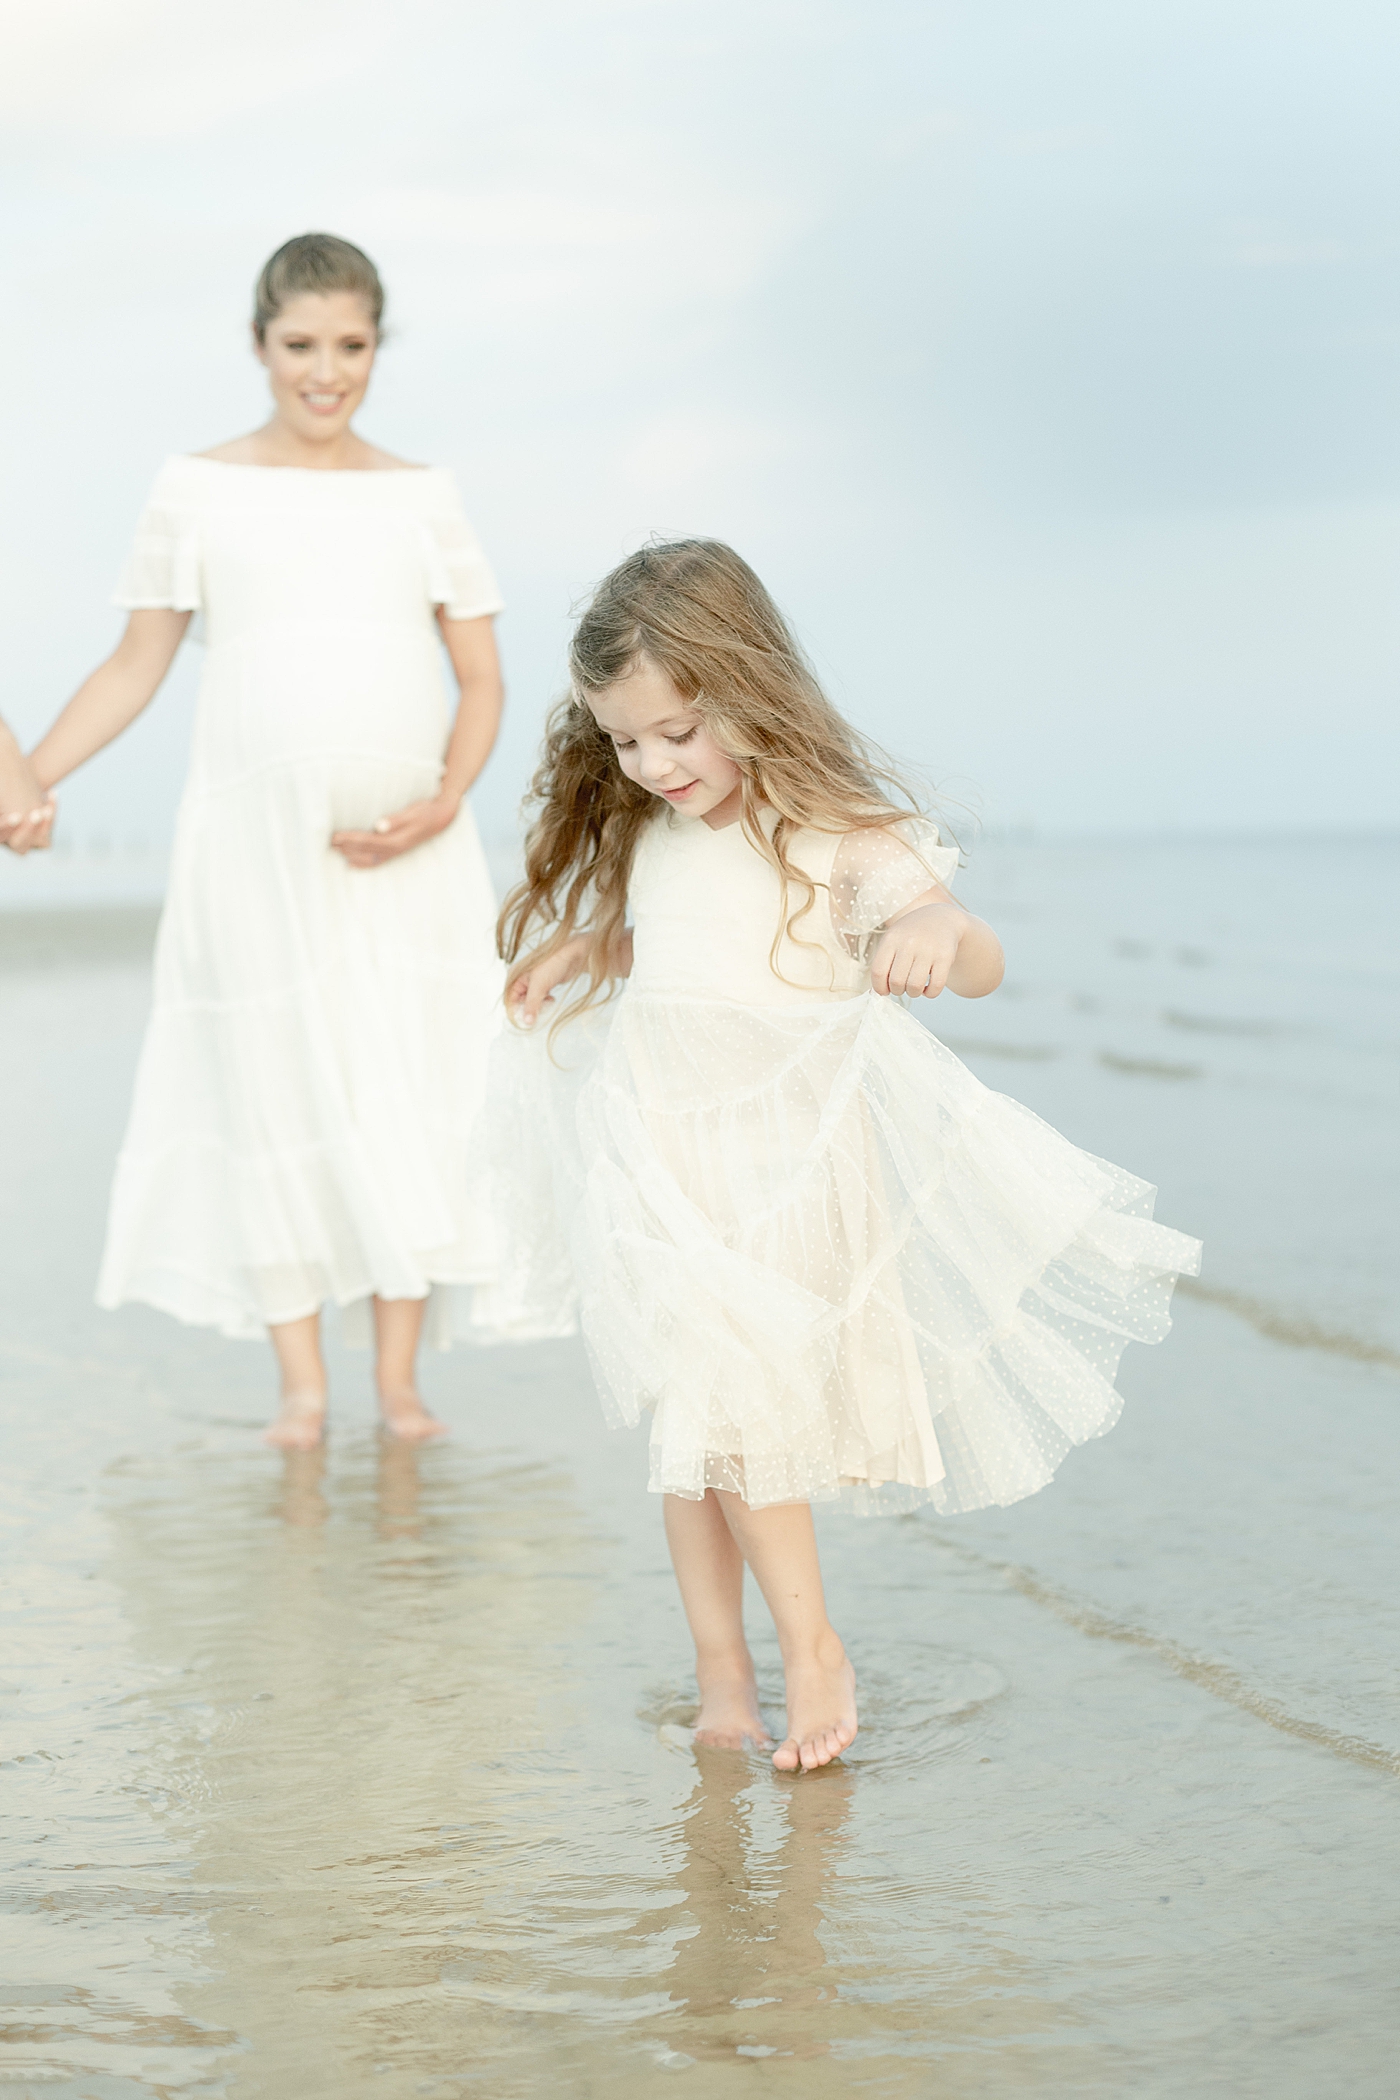 Little girl in white dress walking on the beach | Photo by Little Sunshine Photography